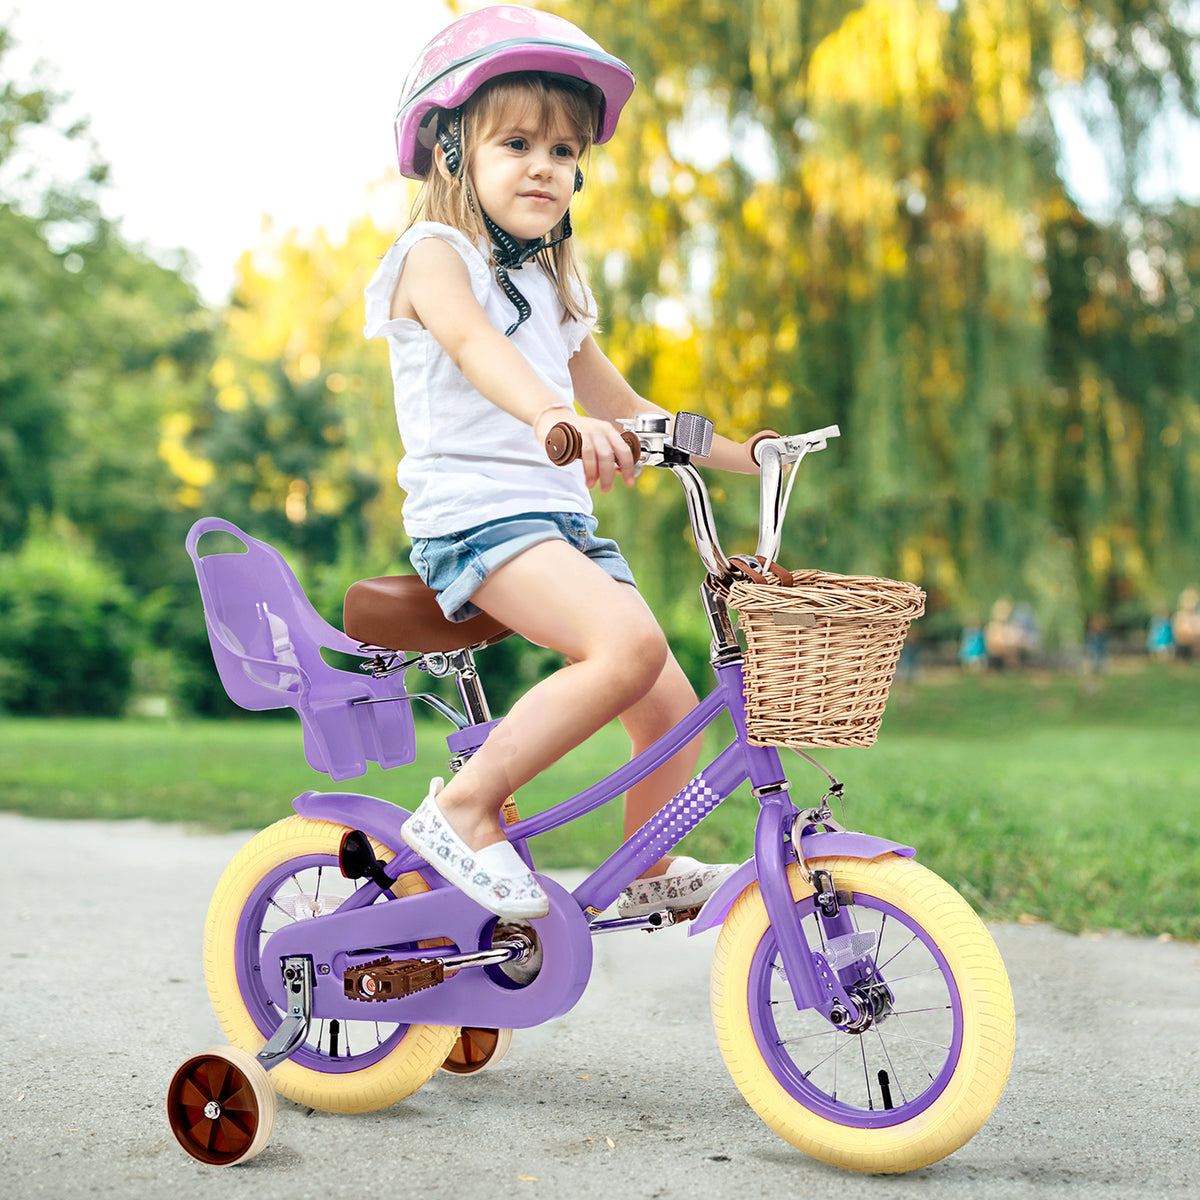 XJD Kids Bicycle for Toddlers and Children 2-12 Years Old, 12 14 16 20 inch Bike for Girls and Boys, with Basket and Bell Training Wheels, Adjustable Seat Handlebar Height, Purple